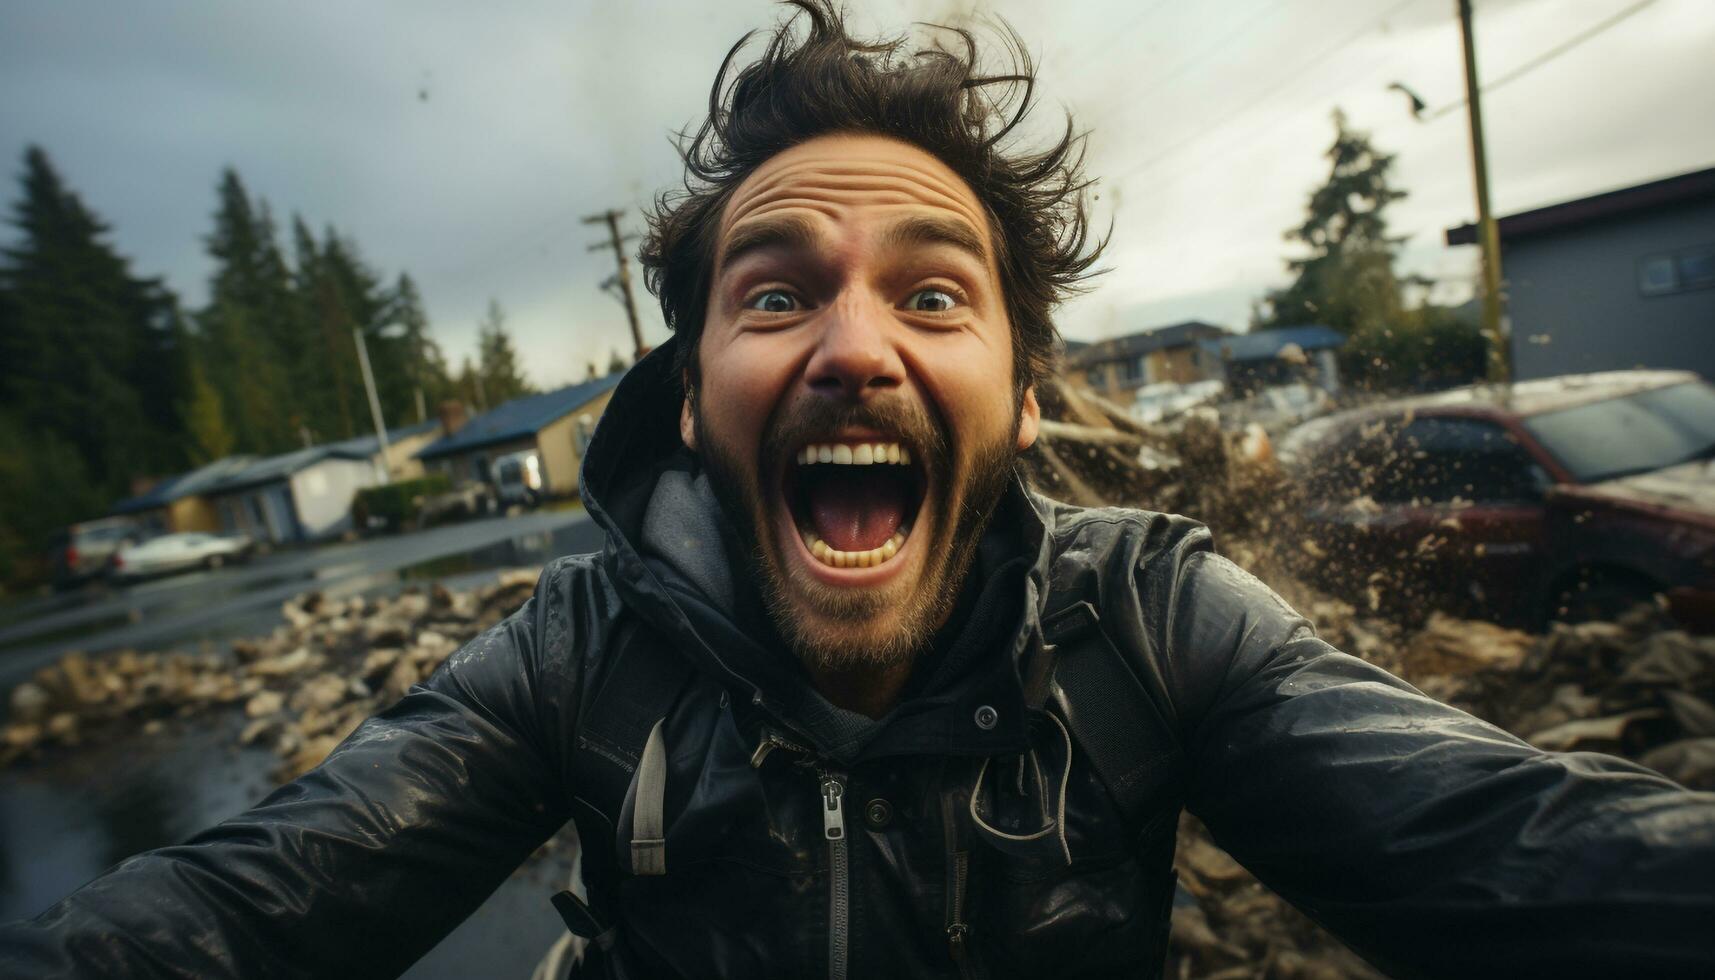 A joyful man screaming in nature, smiling at the camera generated by AI photo